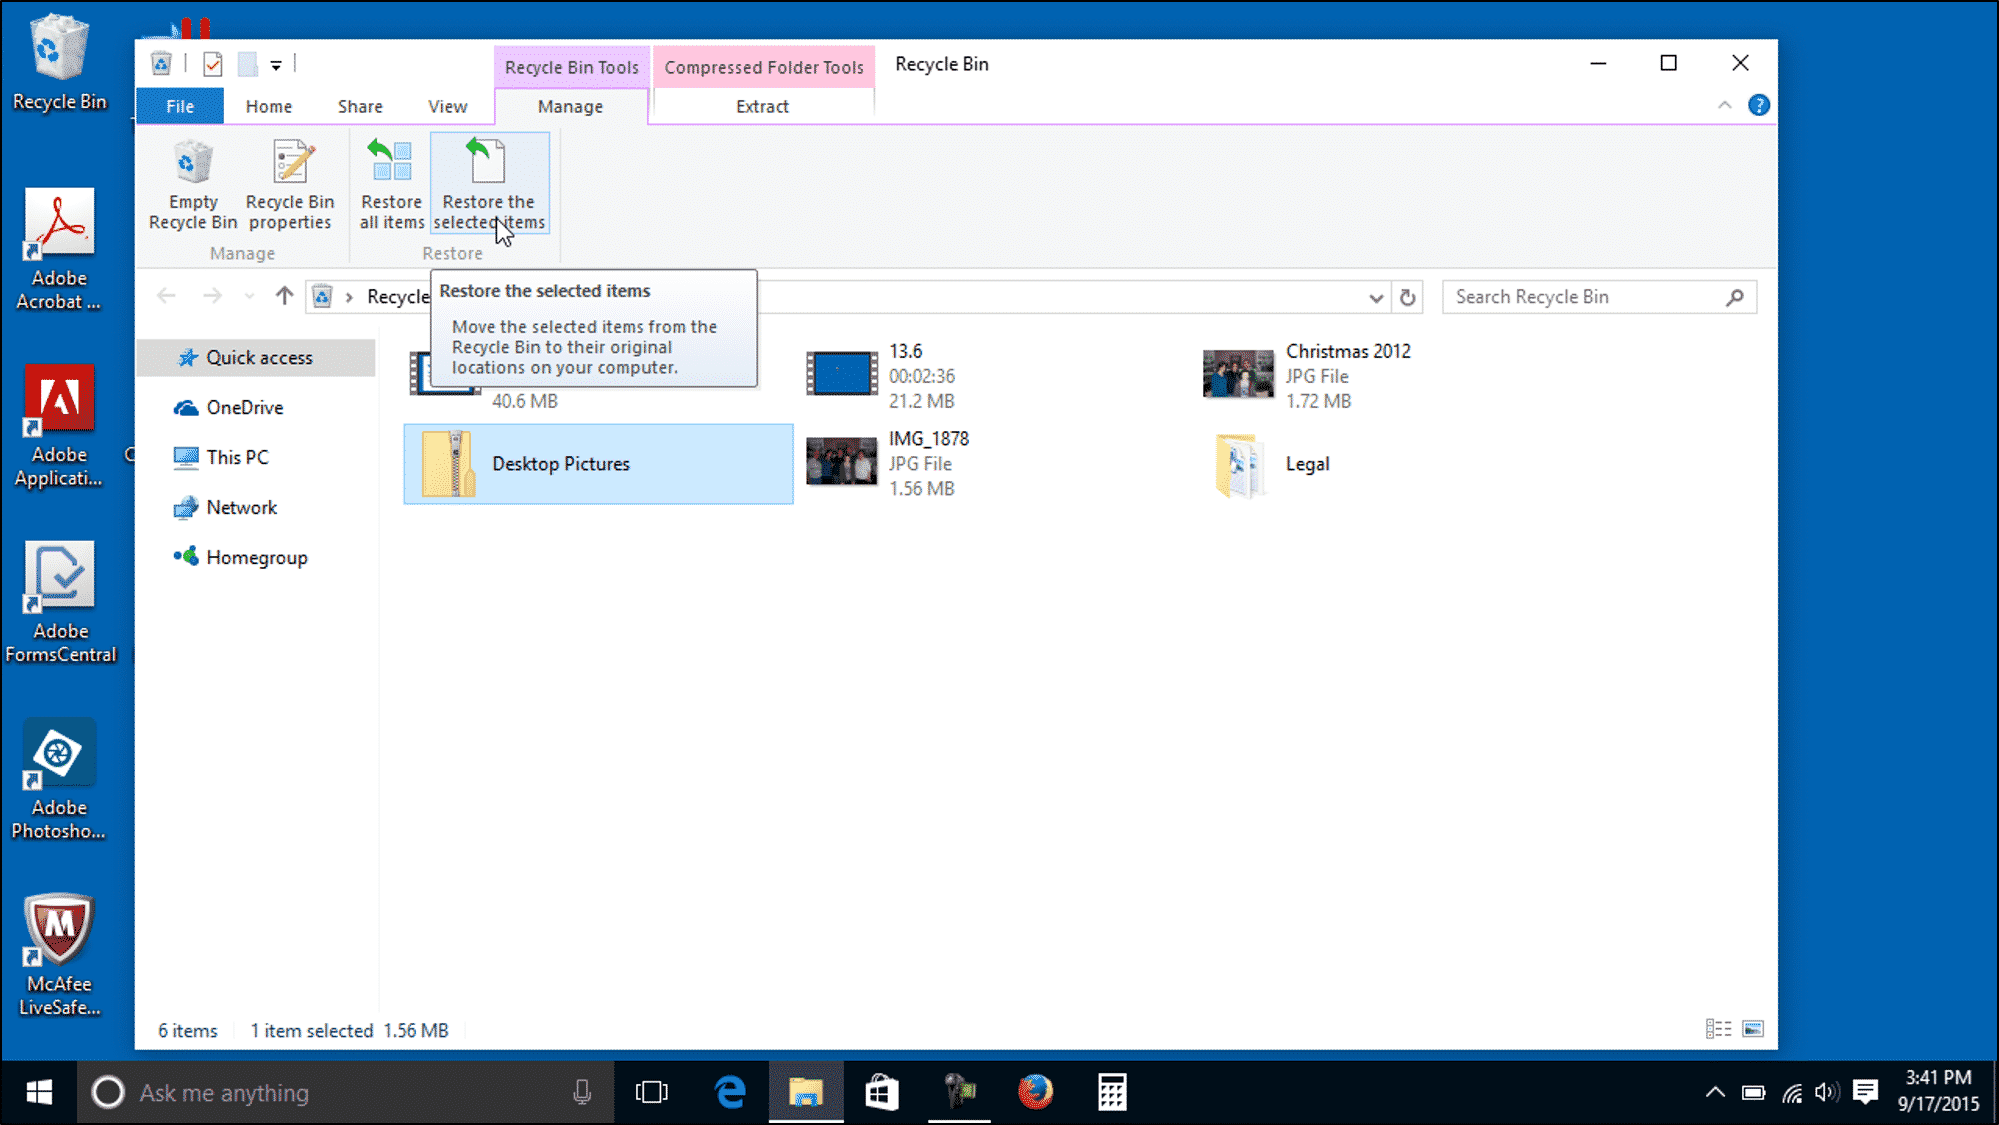 Open the Recycle Bin on your computer.
Search for the deleted file in the Recycle Bin.